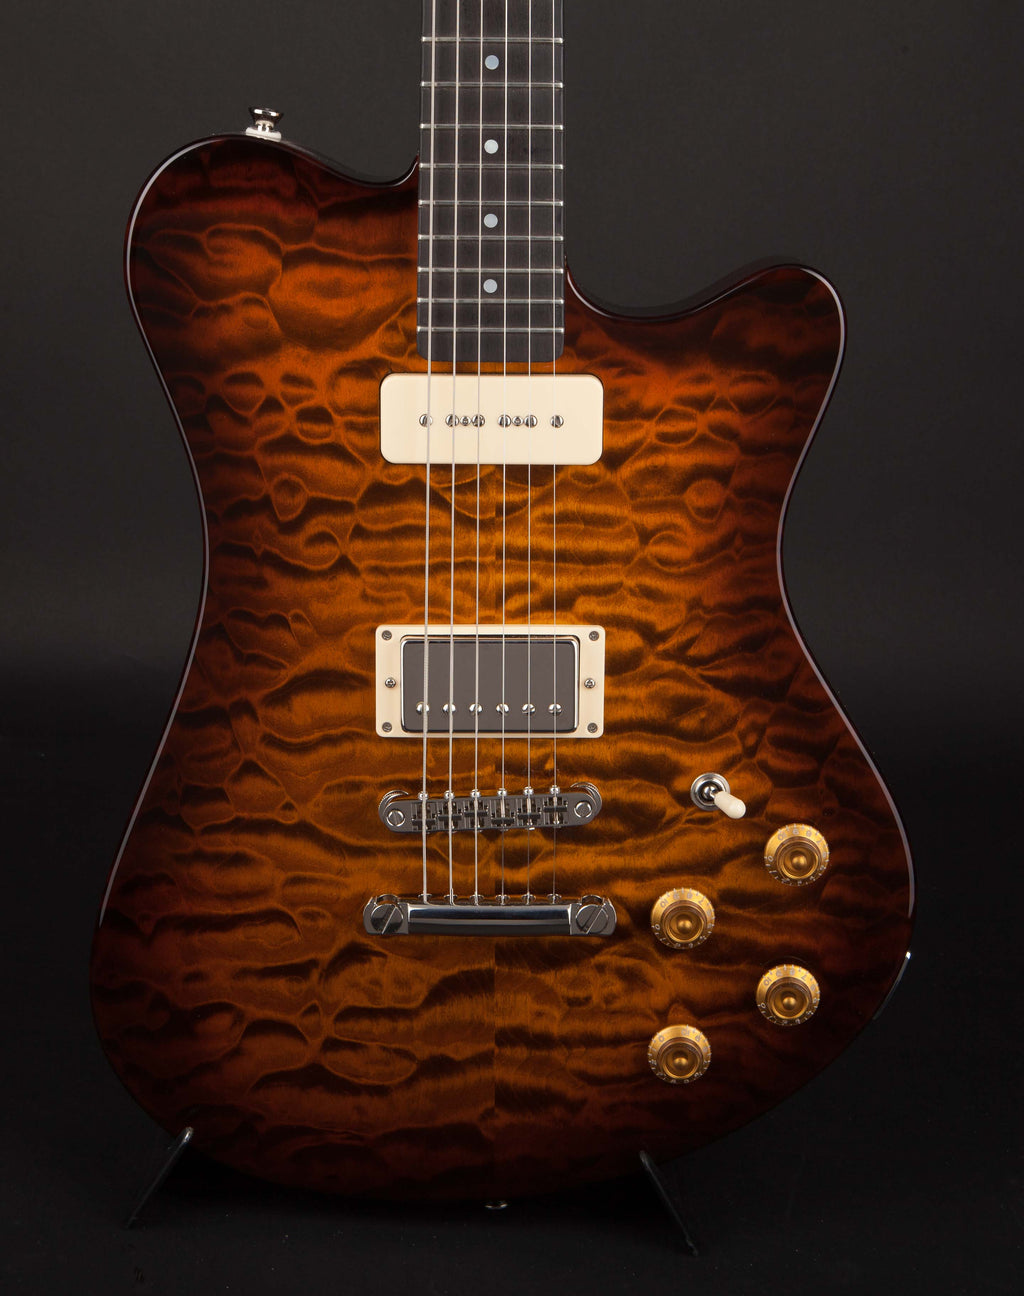 Smitty Guitars: Model 2 Quilt with Mastergrade Quilt Maple Neck